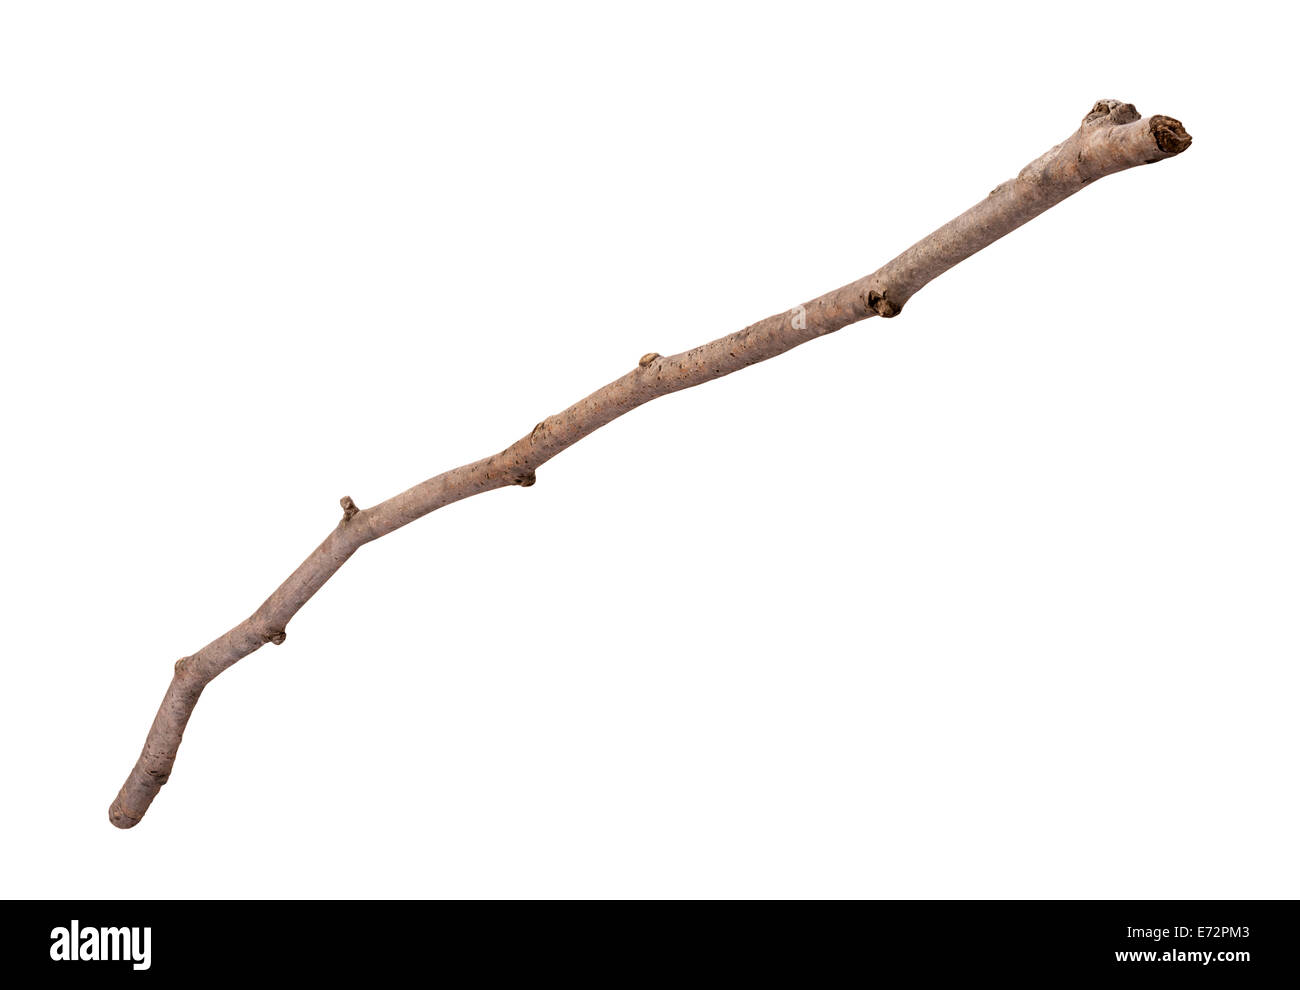 Wooden Twig isolated on a white background. Full focus front to back. Stock Photo